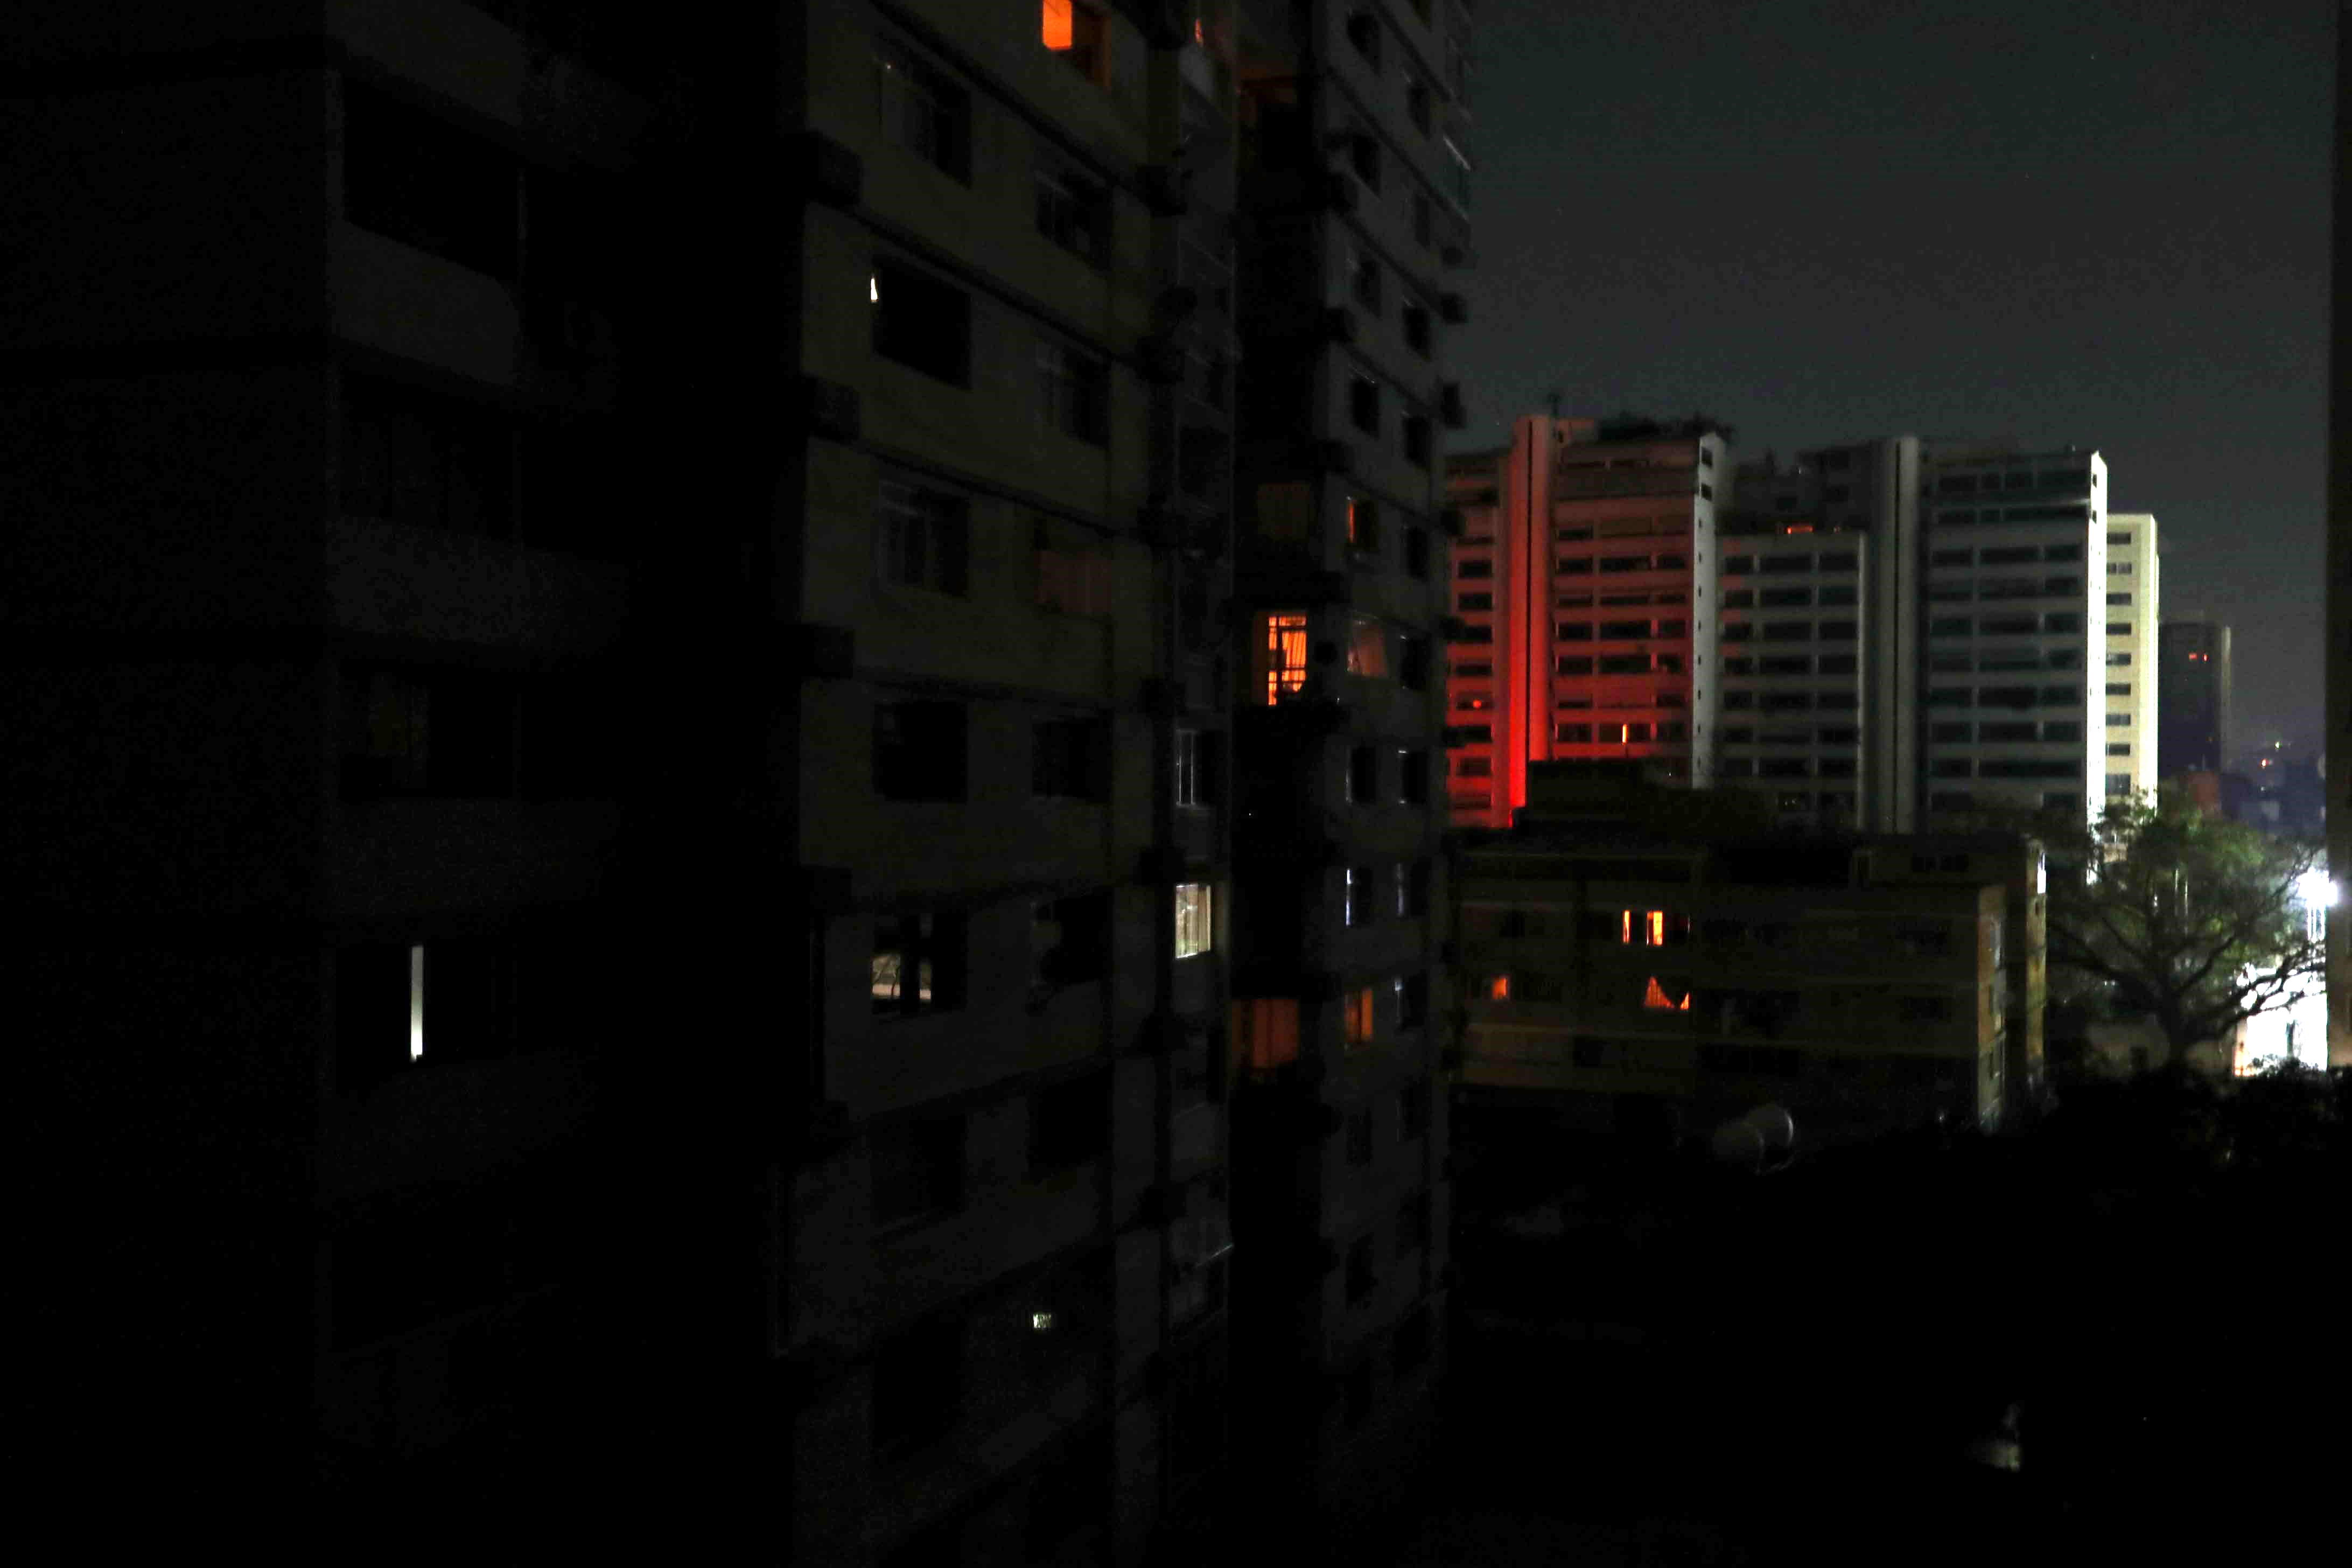 epa07421291 General view of buildings with emergency lights during a power outage in Caracas, Venezuela, 07 March 2019. Venezuela suffered a power outage on 07 March that saw at least 14 states affected, including the country's capital.  EPA/RAUL MARTINEZ SHUTTERSTOCK OUT